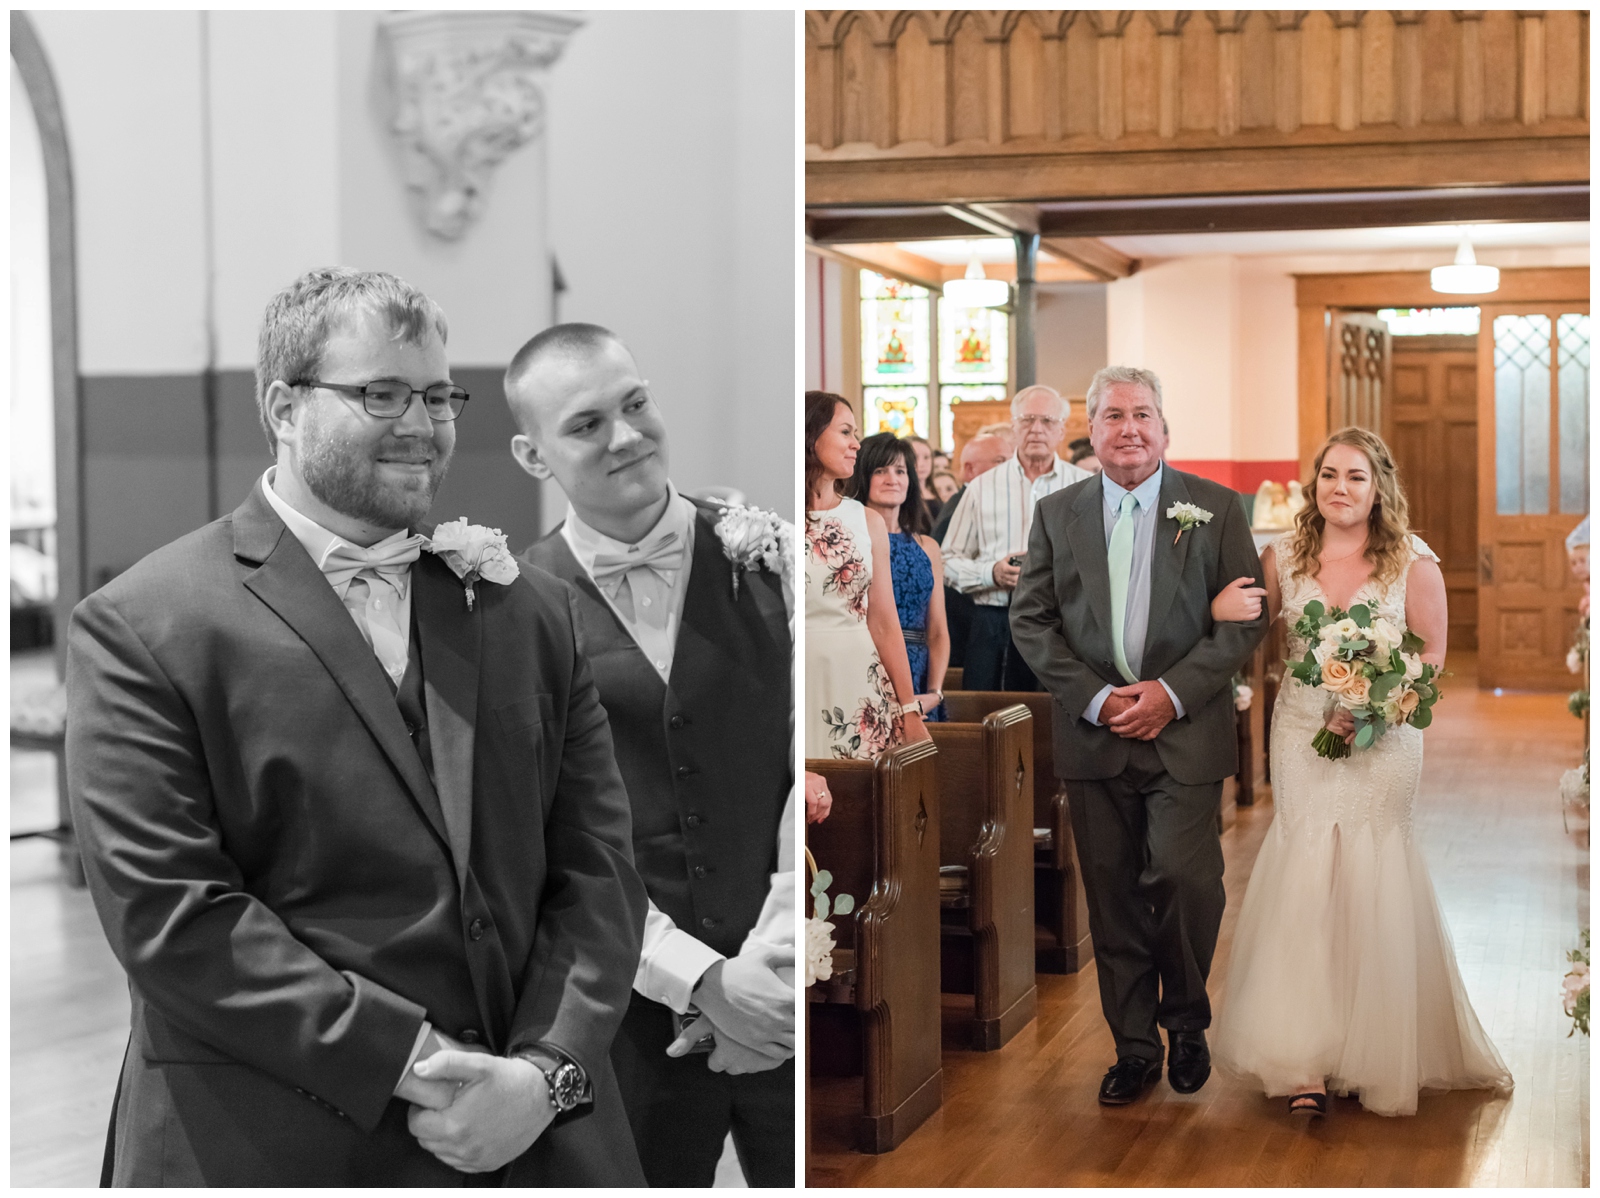 groom and bride see each other for the first time on wedding day while bride walks down the aisle